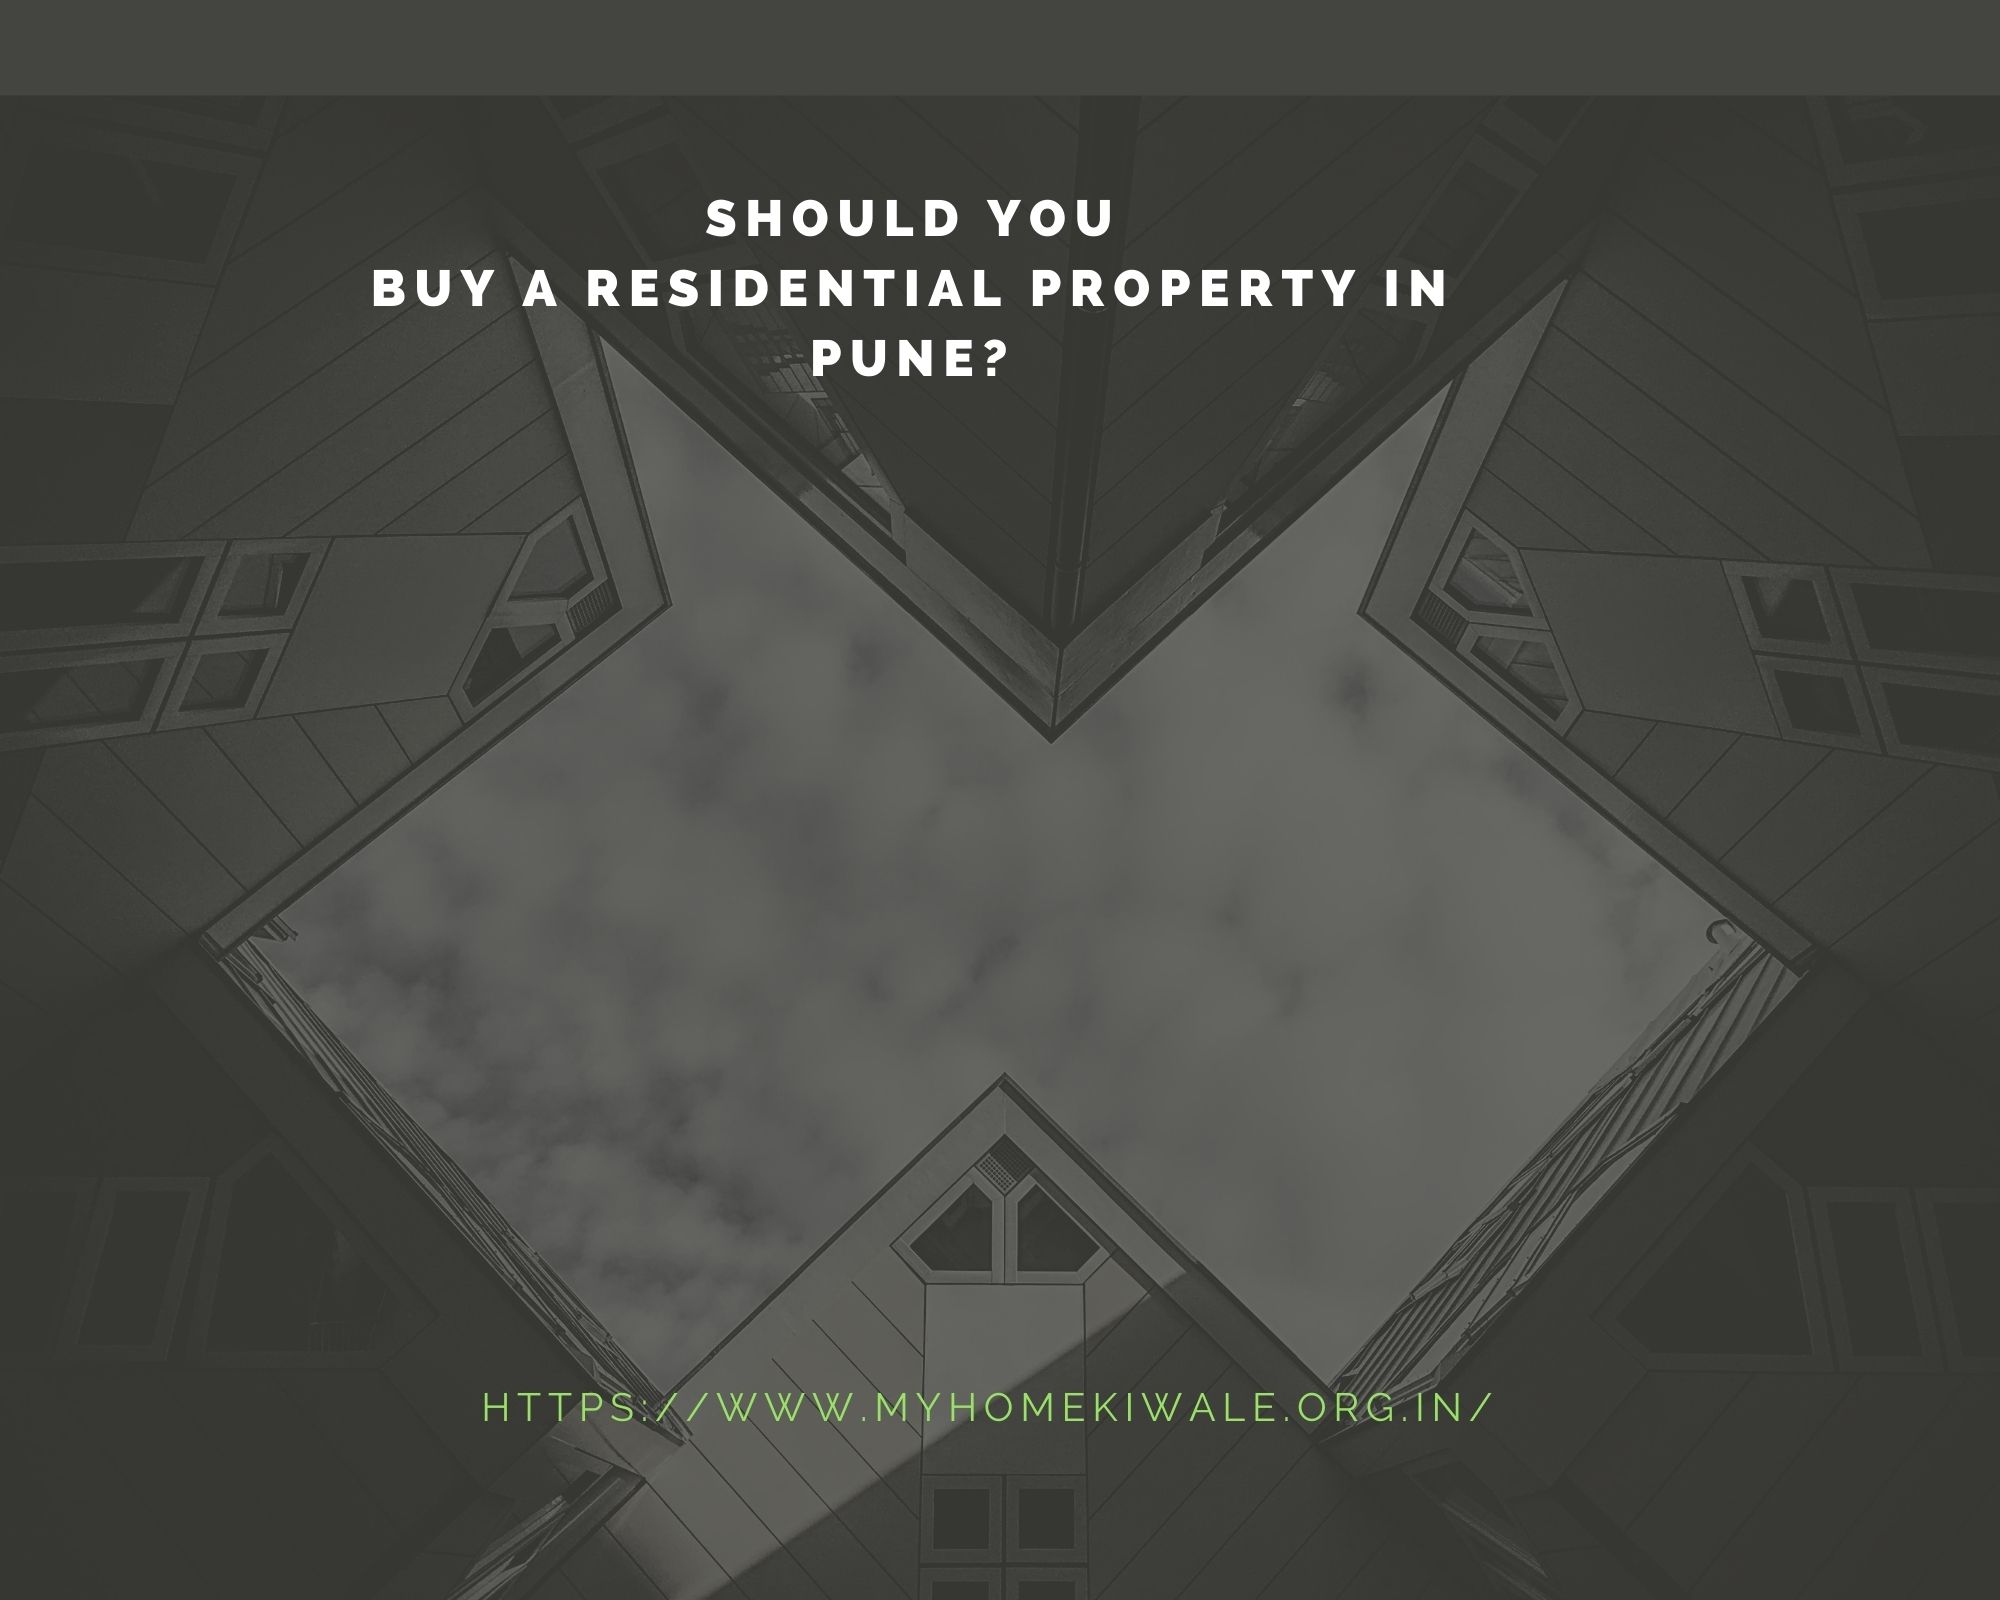 Should you buy a residential property in Pune?